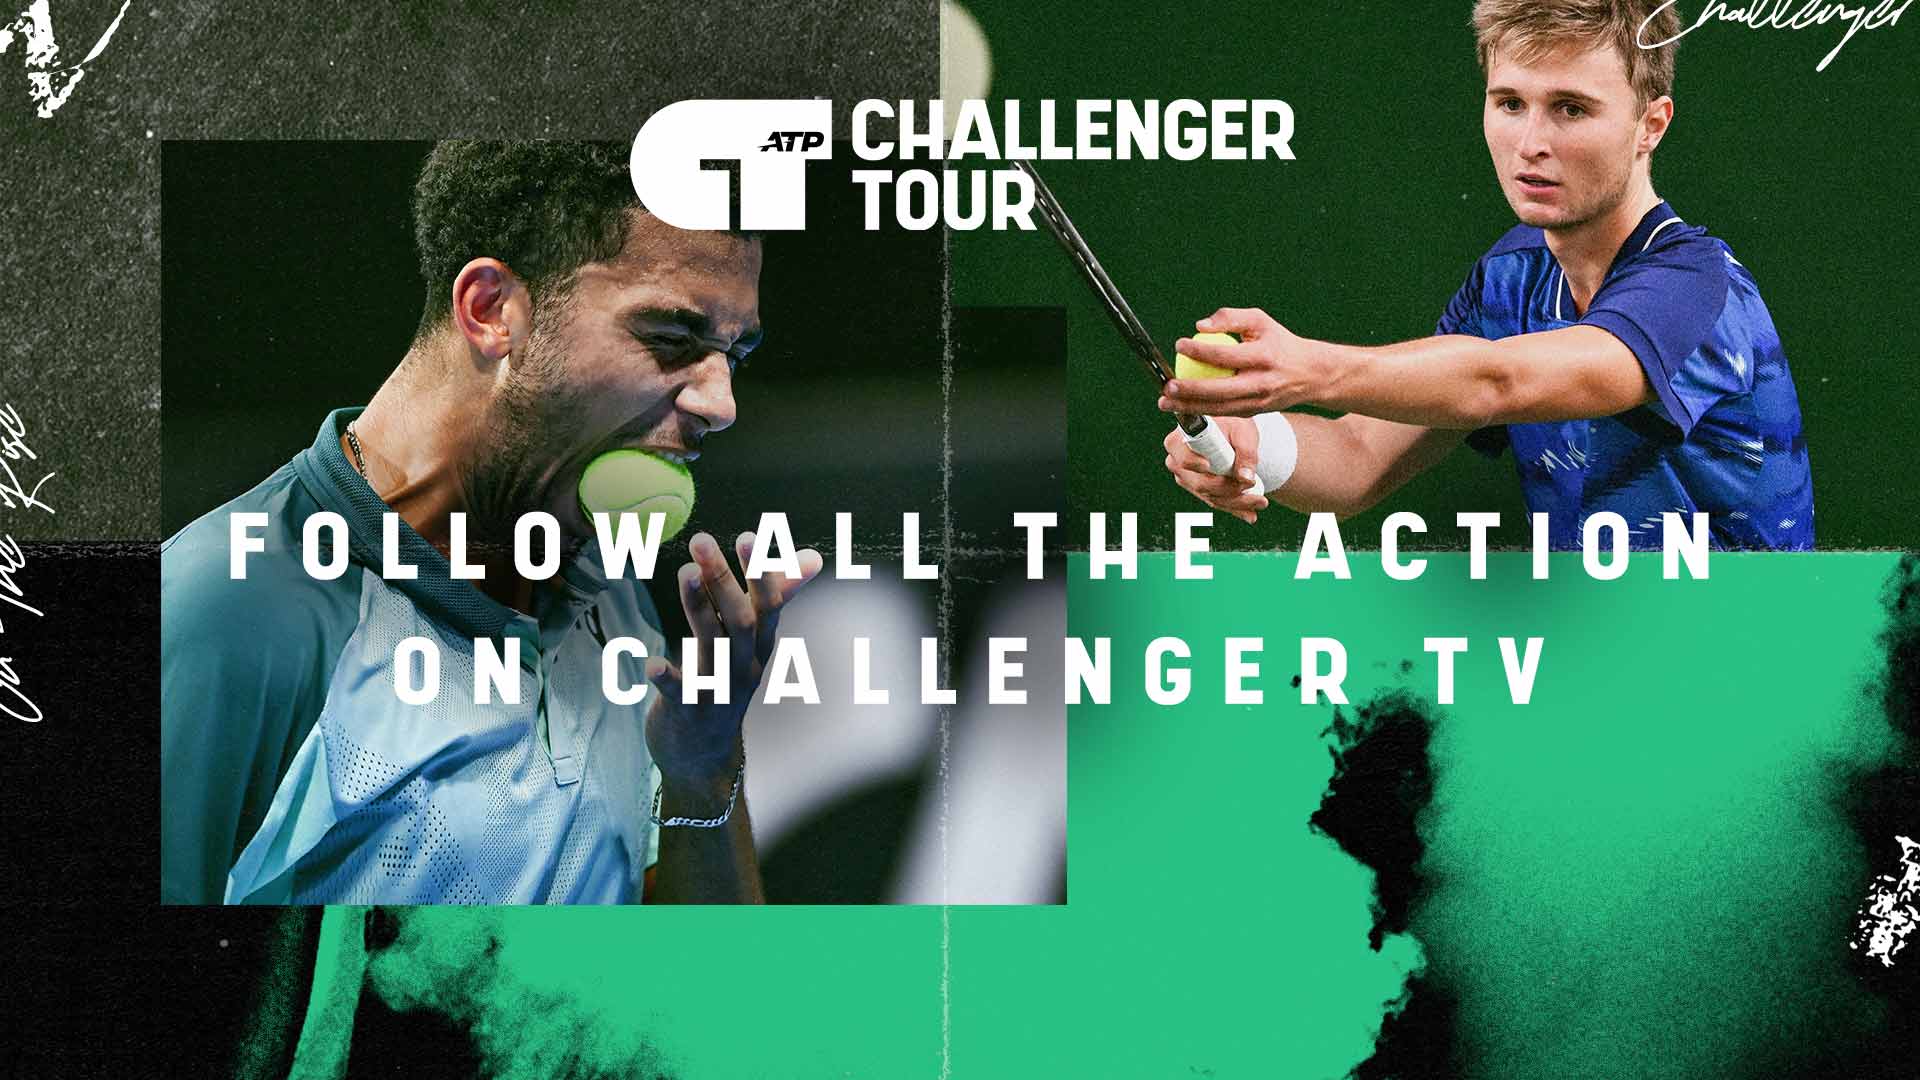 How To Watch ATP Challenger TV; View Schedule and Scores ATP Tour Tennis